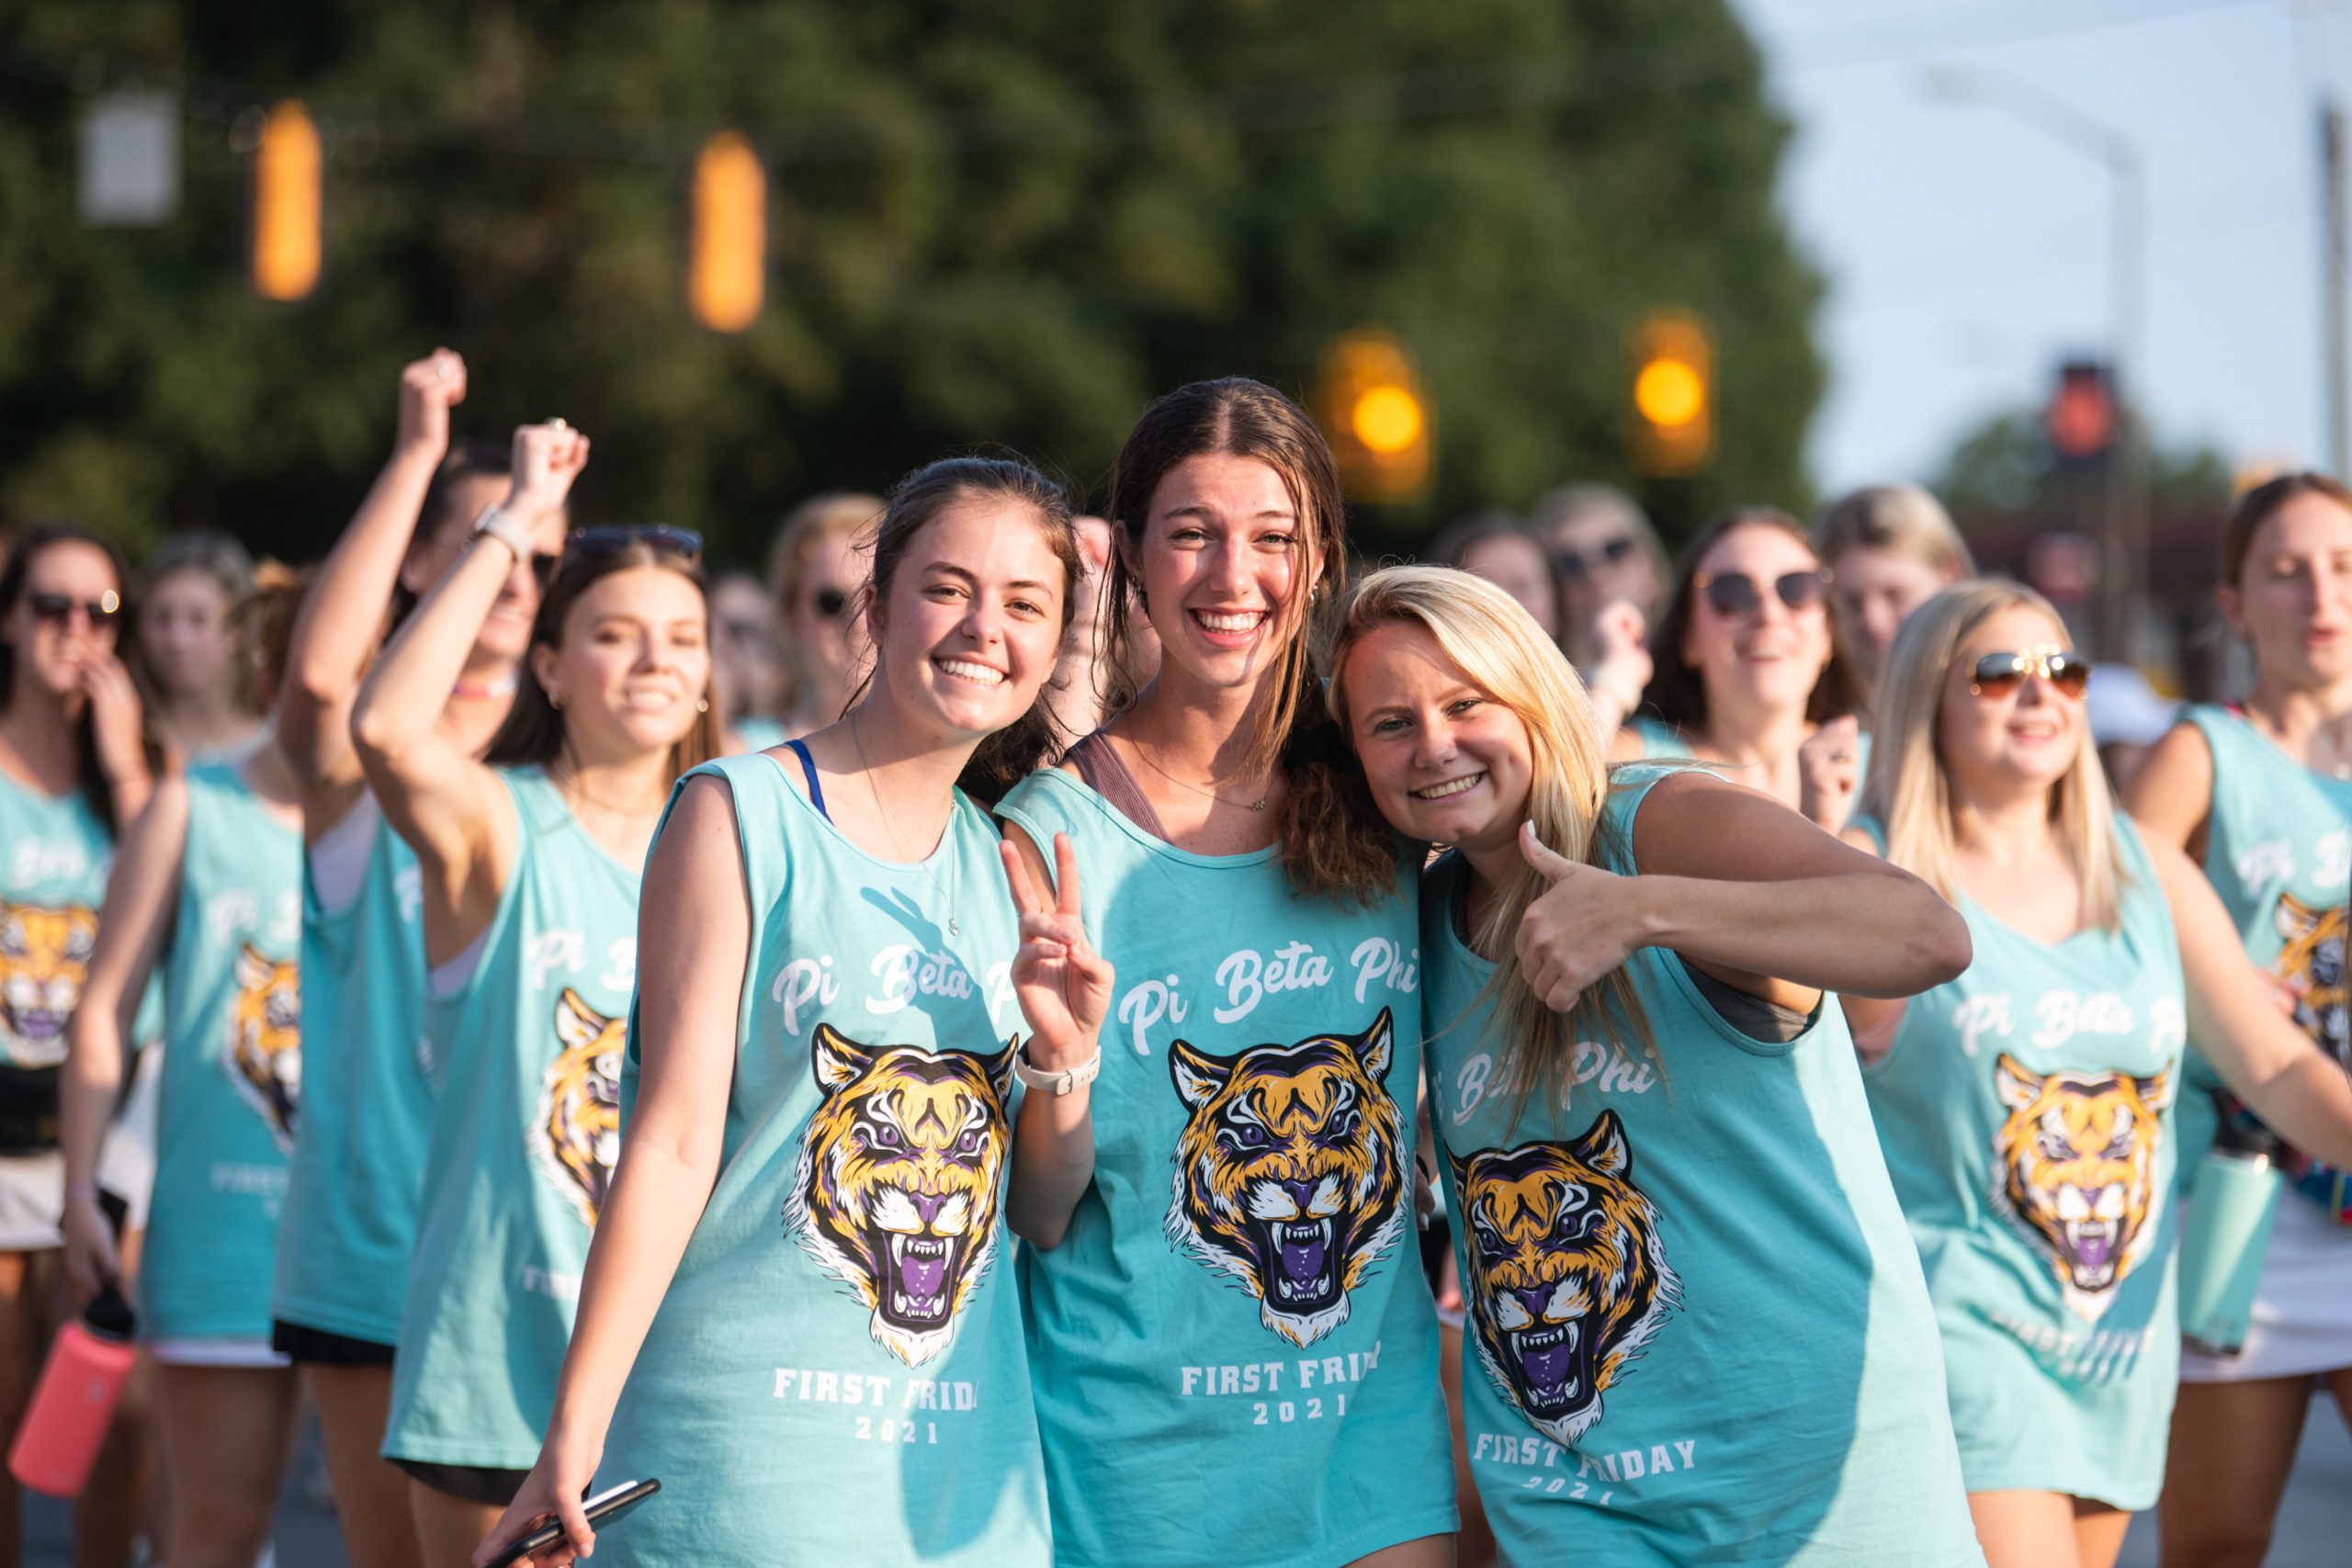 Sorority members enjoy the 2021 First Friday Parade in Clemson